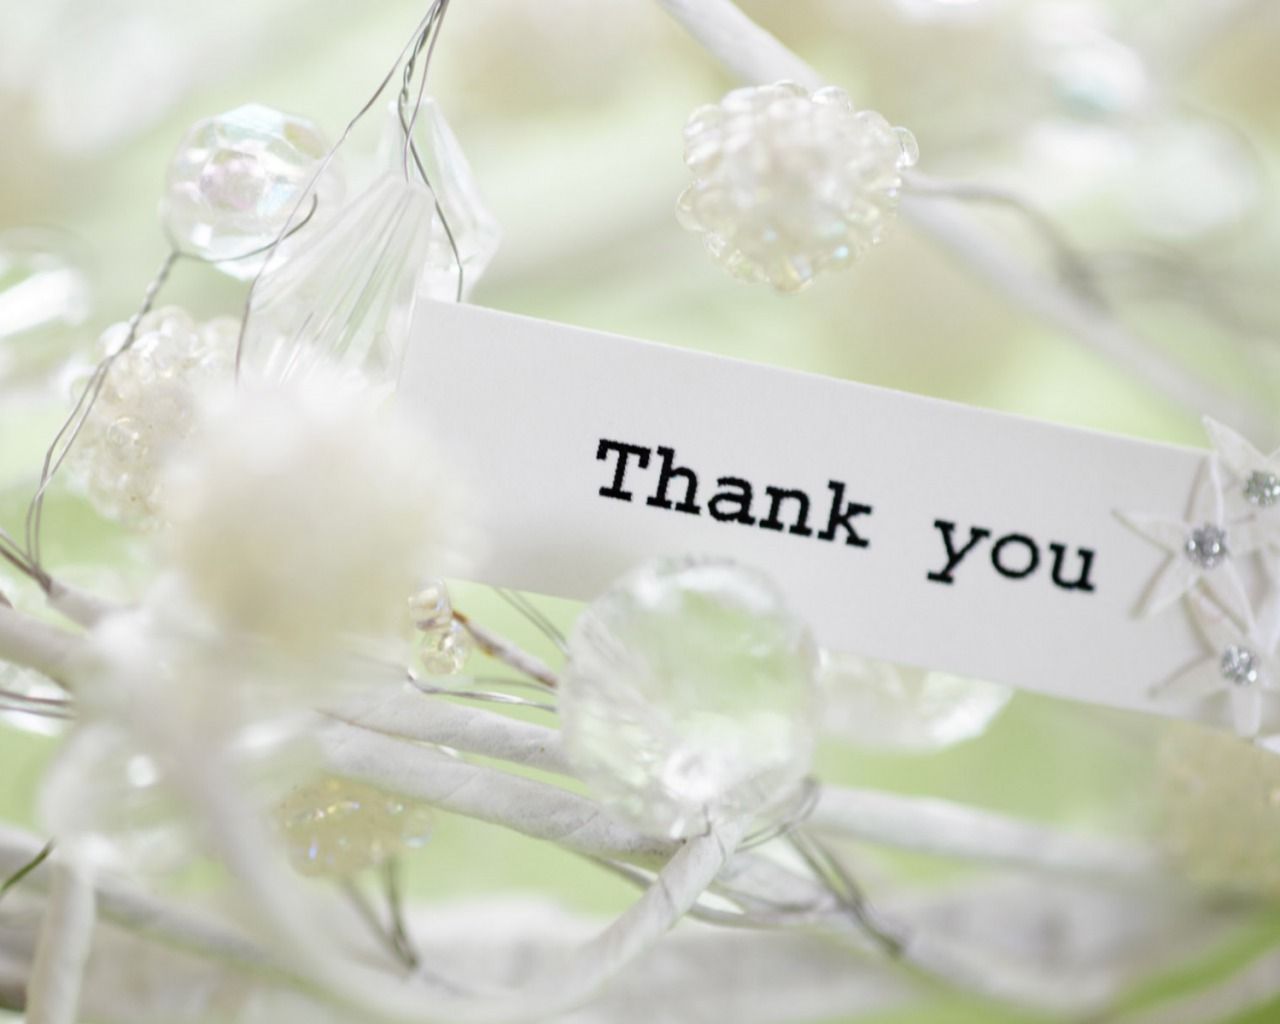 Thank You desktop free hd wallpapers Wallpapers Wide Free